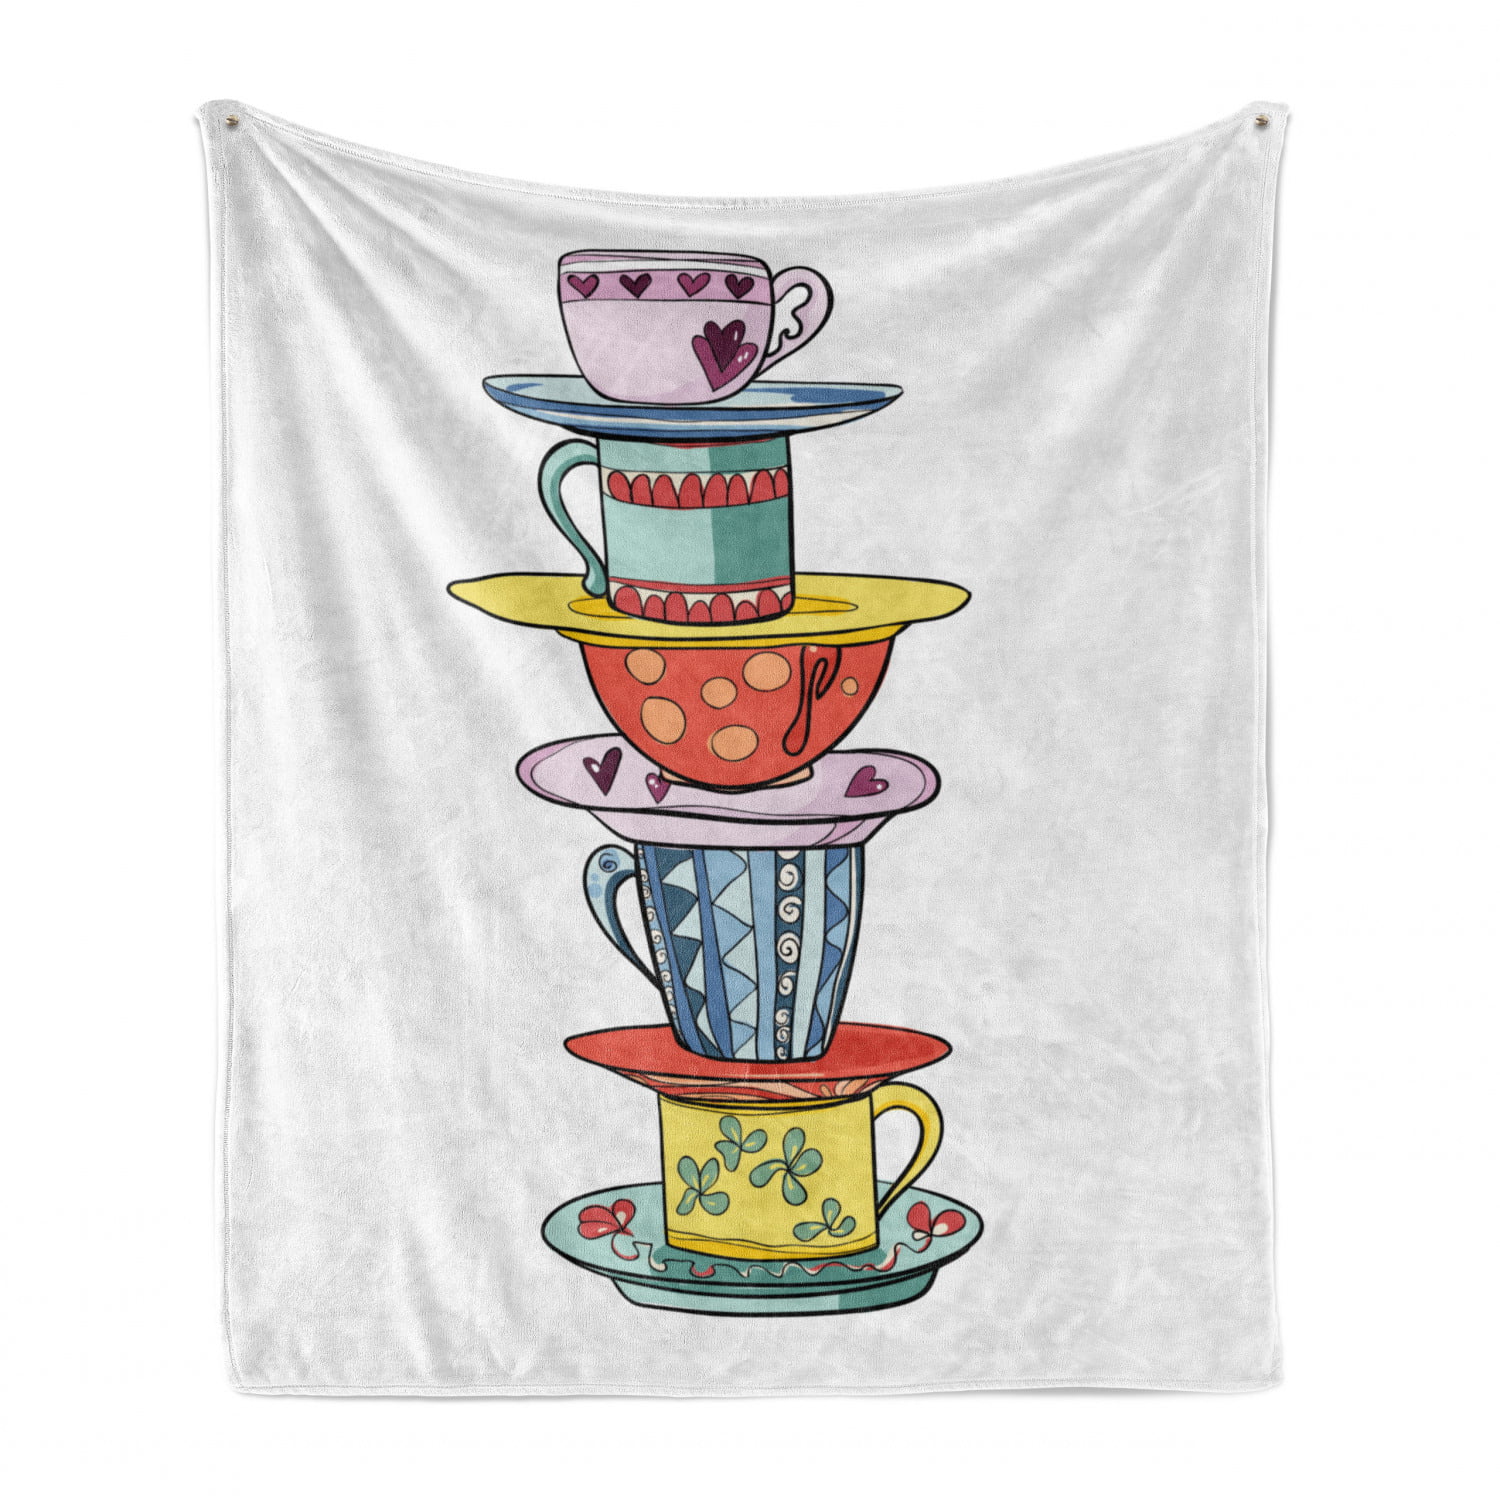 50 x 60 Ambesonne Tea Party Soft Flannel Fleece Throw Blanket Multicolor Cozy Plush for Indoor and Outdoor Use Colorful Coffee Cups and Tea Mugs Pattern Having a Hot Drink Kitchen Utensils 